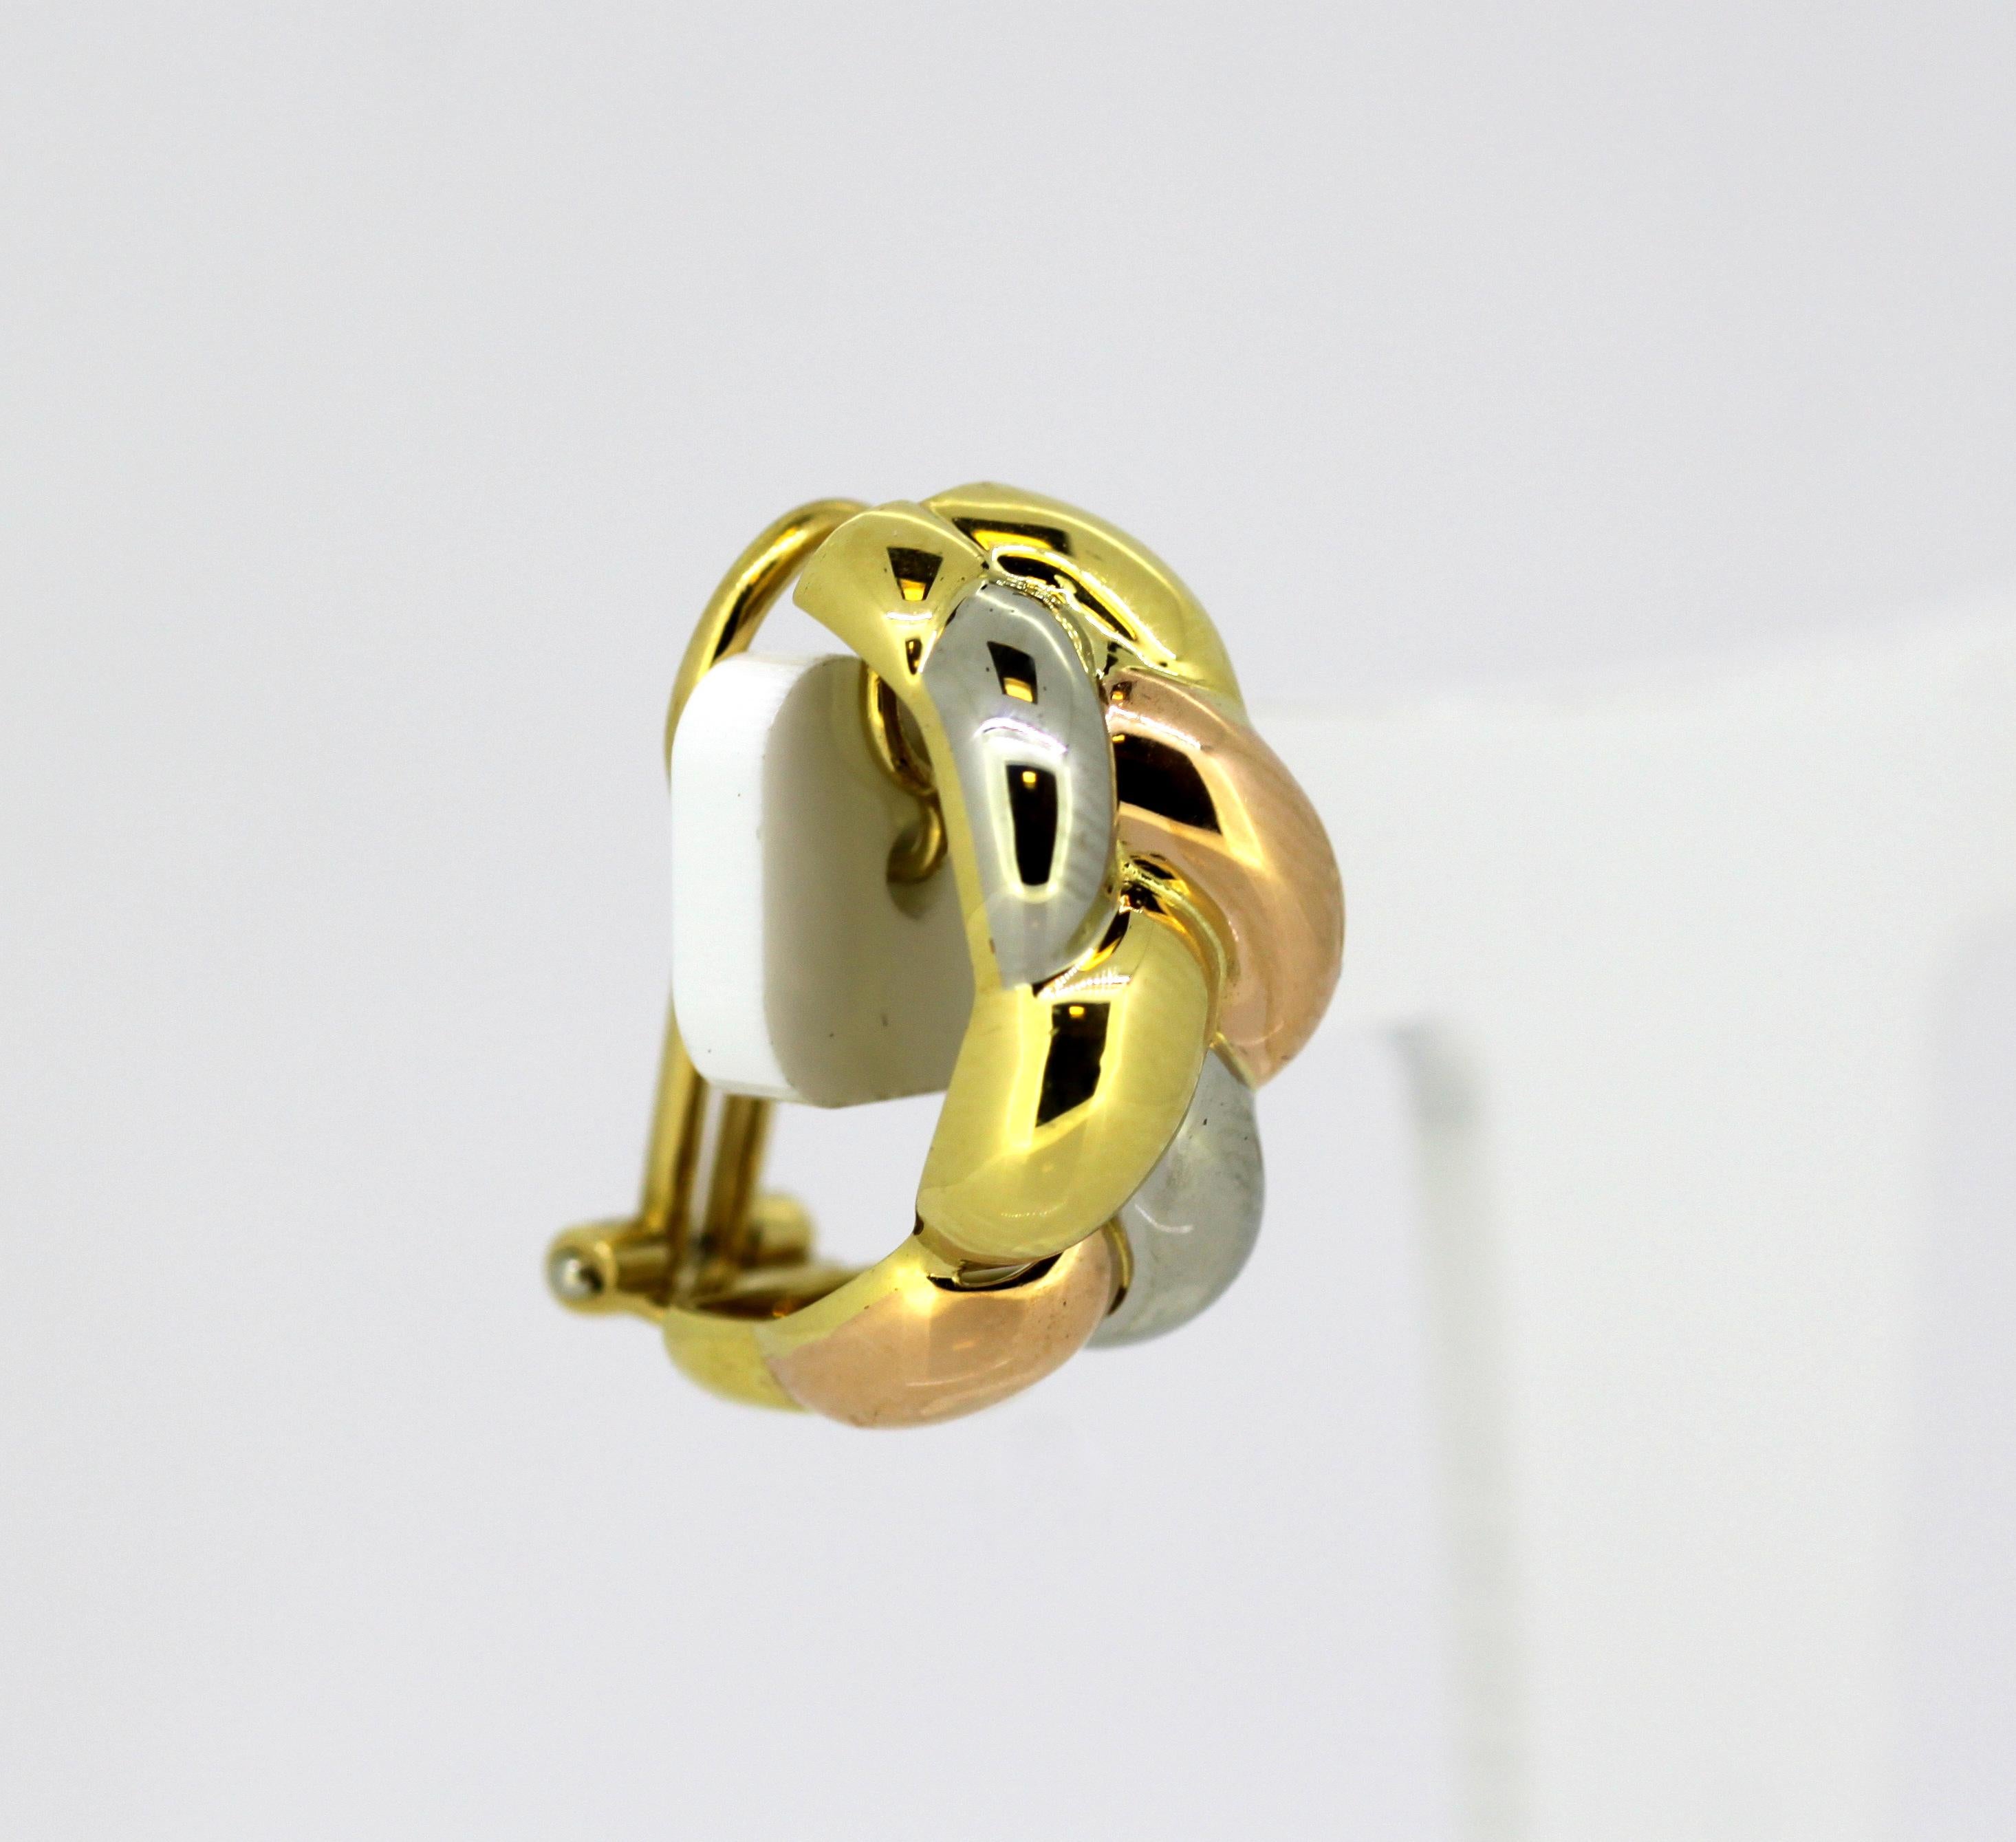 GRAFF - Ladies three color 18k gold clip-on earrings.

DESIGNER: GRAFF

London Import Hallmark Dating 1992

Fully hallmarked.

Dimensions -
Size: 2.4 x 1.7 x 1 cm
Weight: 13 g 

Condition: Earrings are pre-owned, they have some minor wear and tear